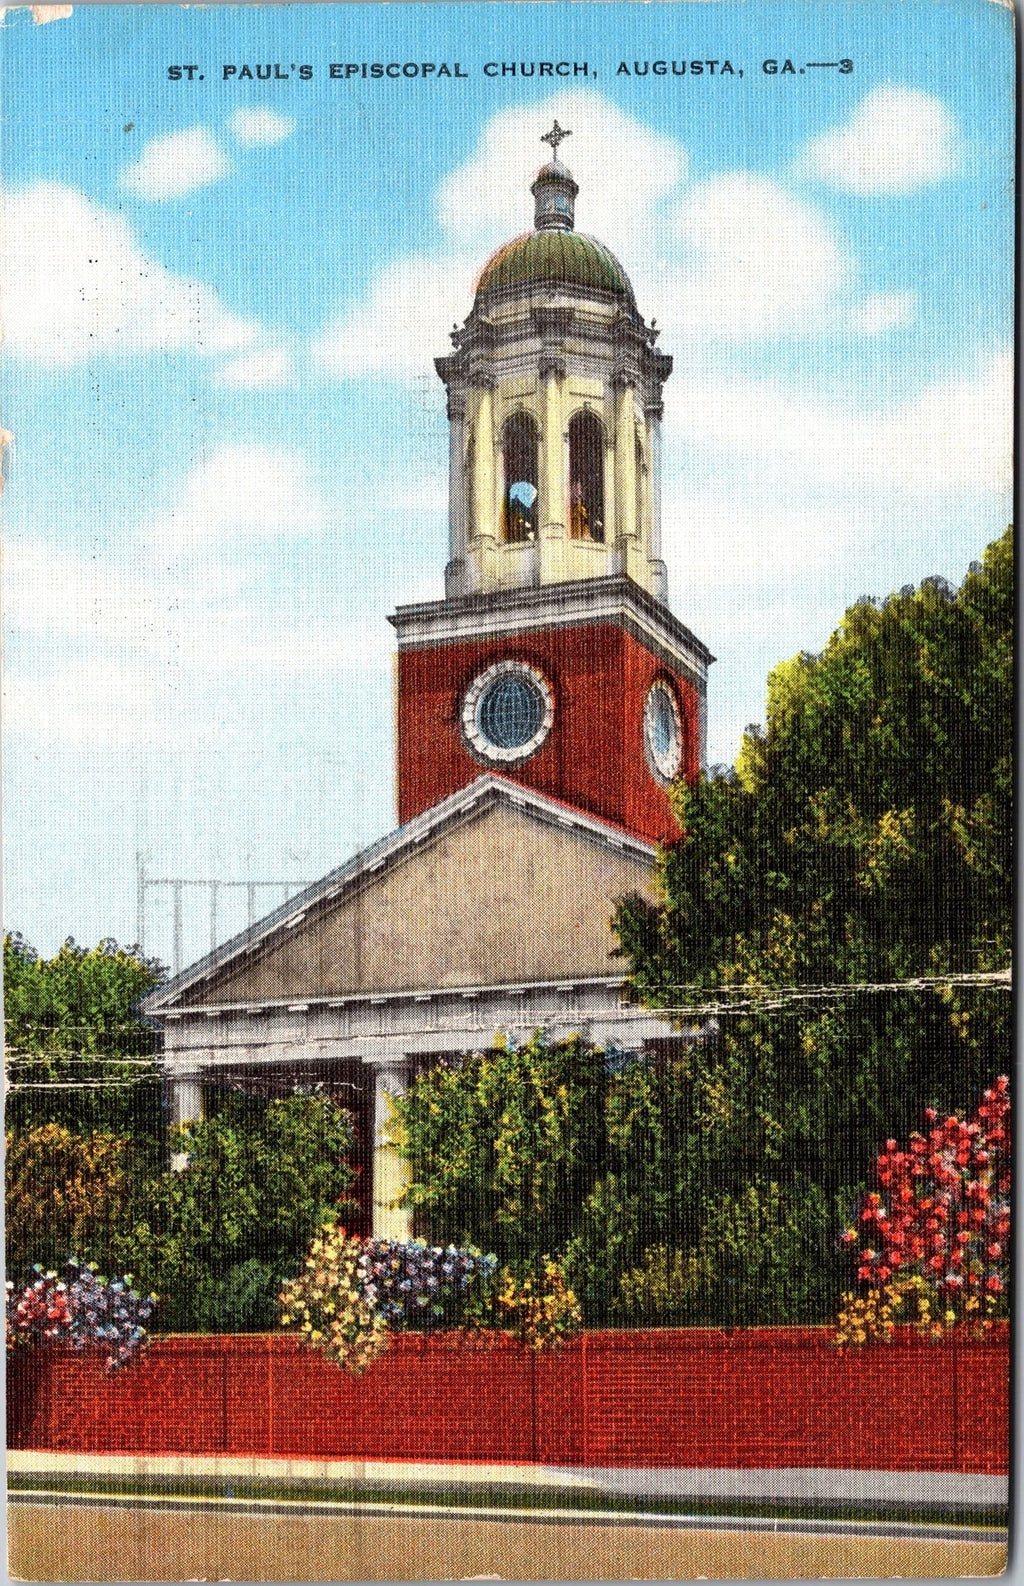 St. Paul’s Episcopal Church, Erected In 1750, Close To Fort Augusta, Vintage Post Card